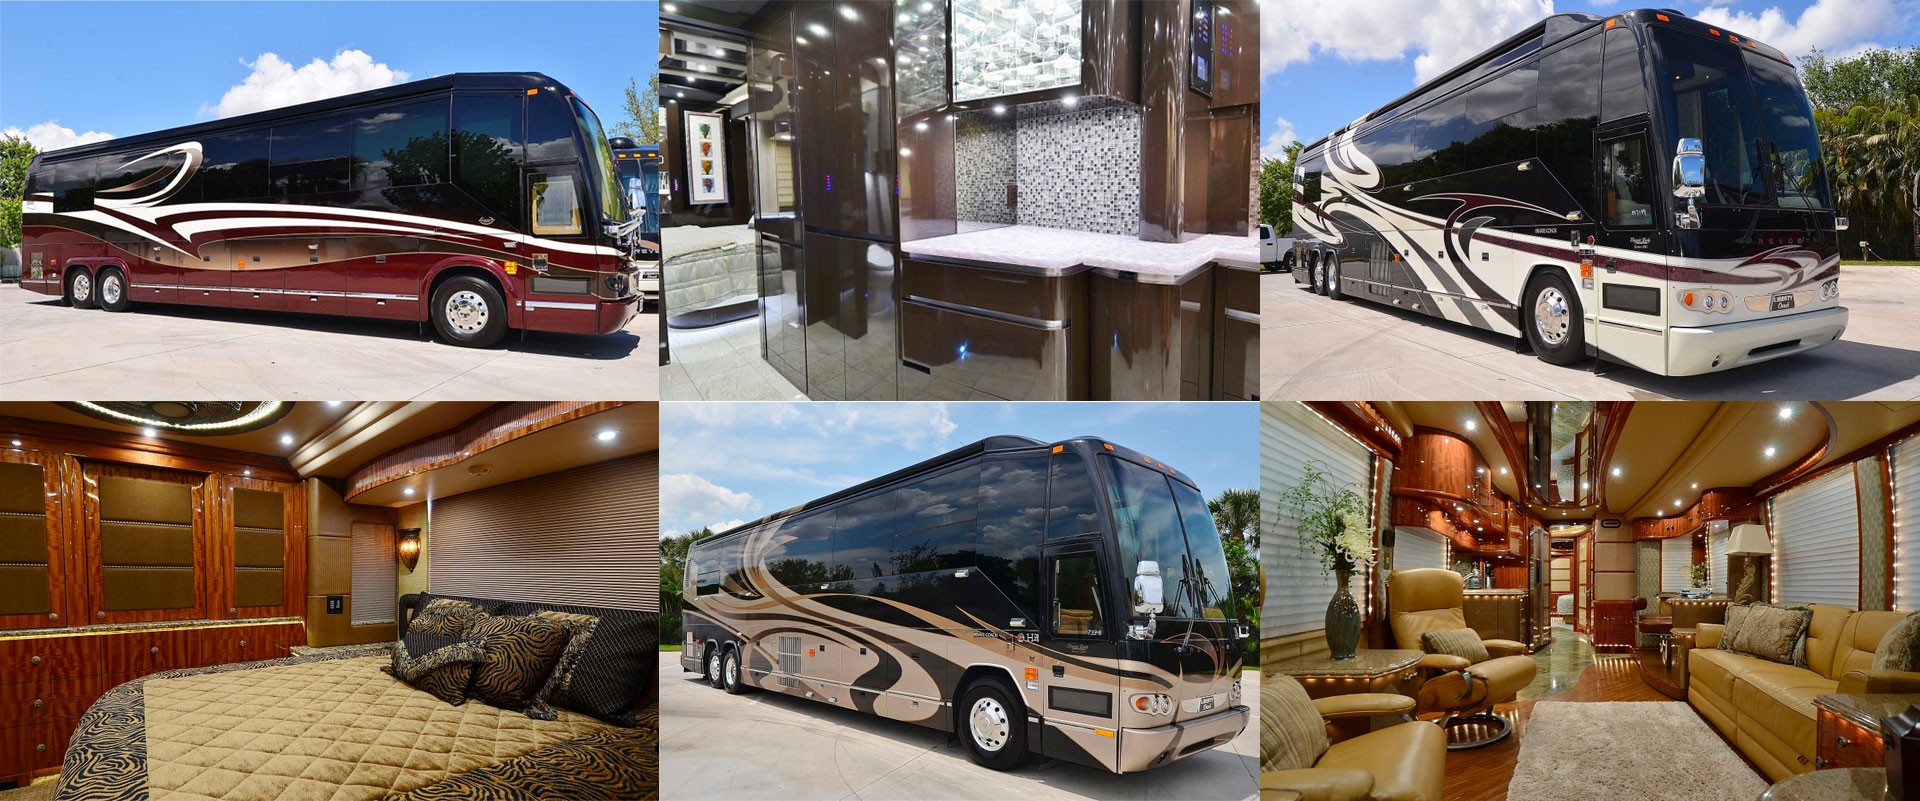 A Collage of Motorcoach Exteriors and Interiors